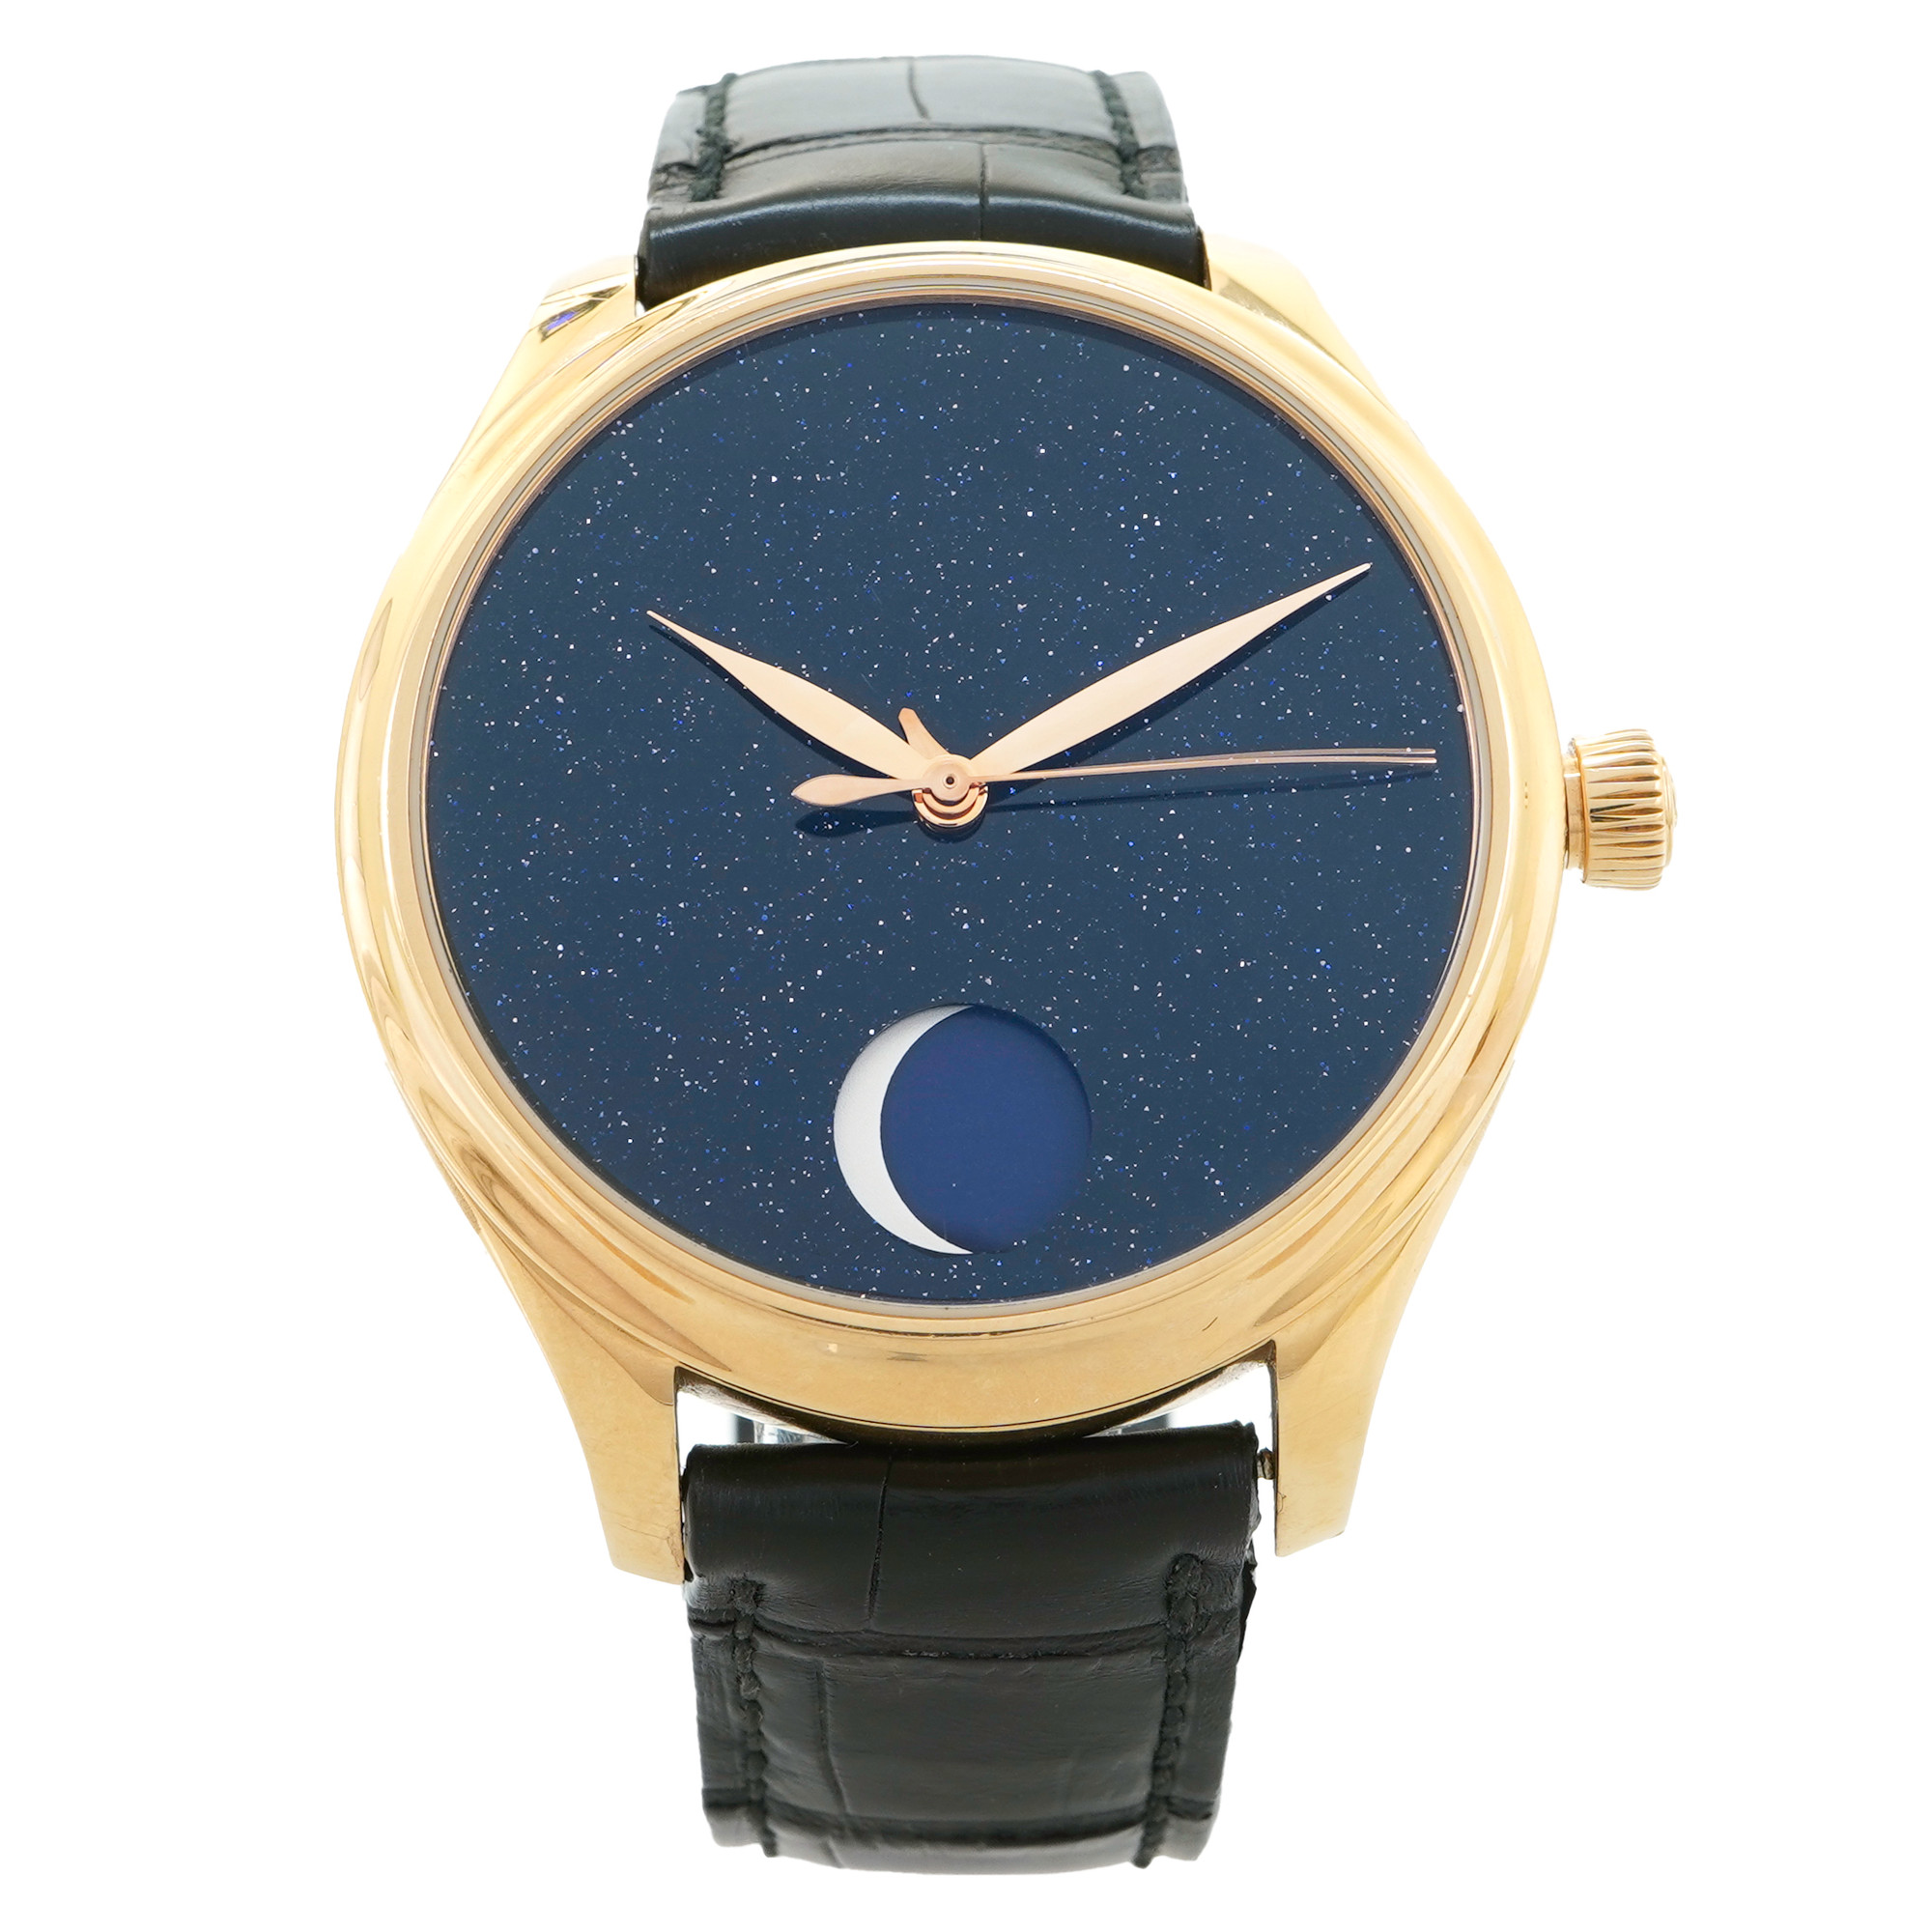 H Moser Endeavour Perpetual Moon Limited Edition 1801-0402 *Aventurine Dial* - Inventory 5500